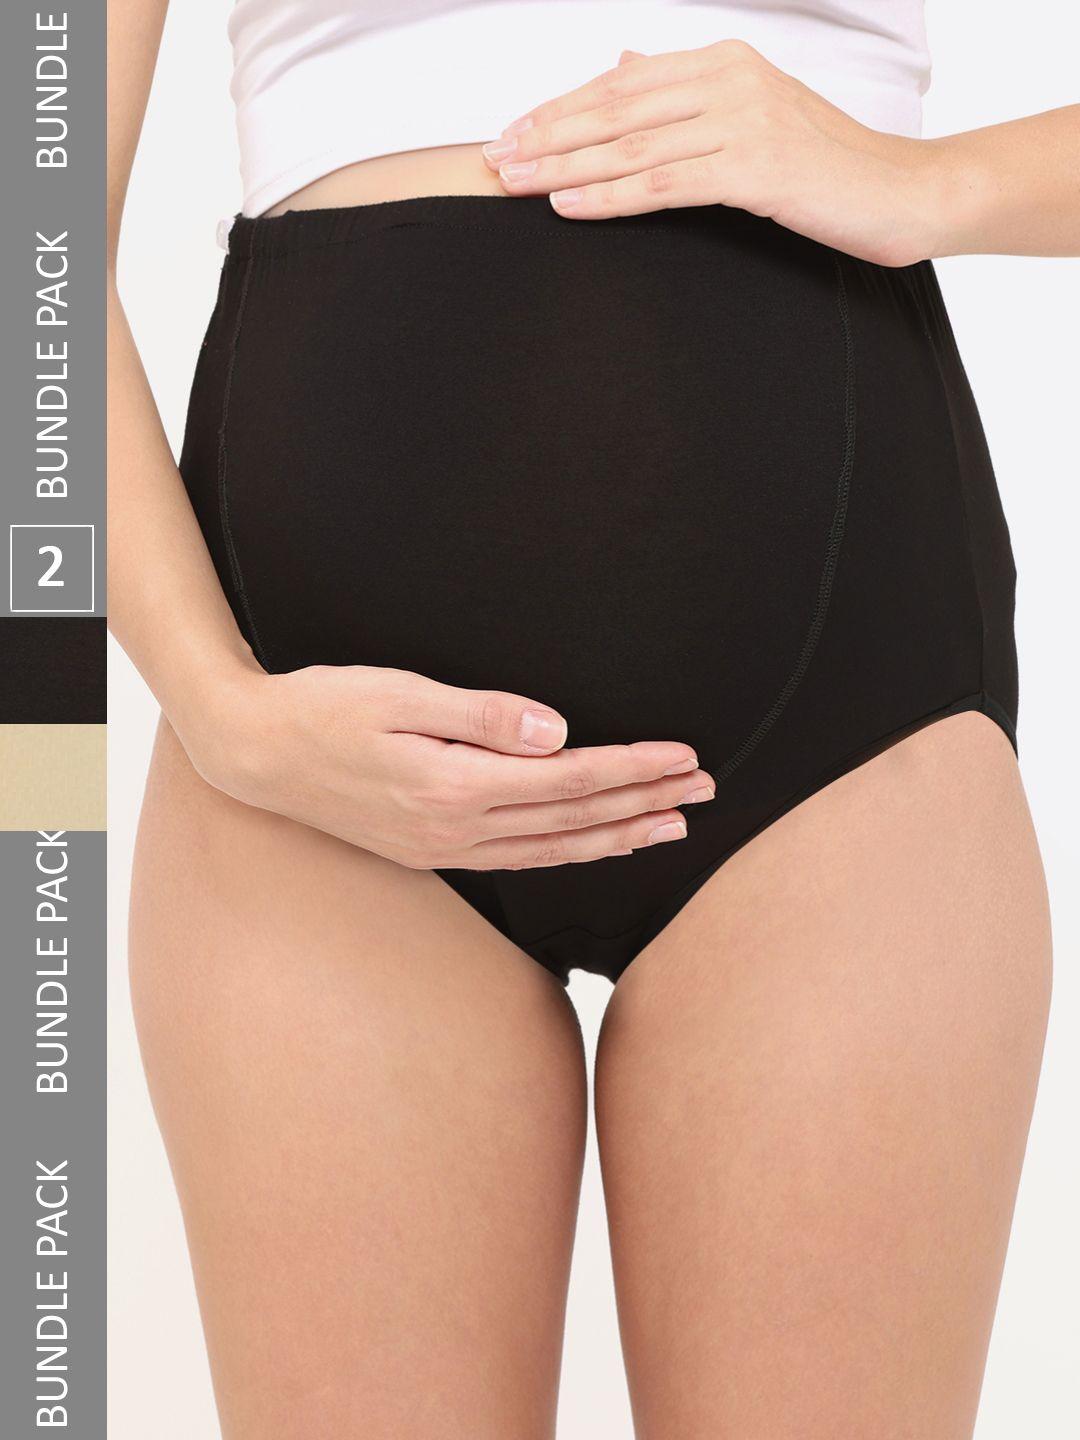 mylo essentials women pack of 2 pure cotton antimicrobial maternity briefs